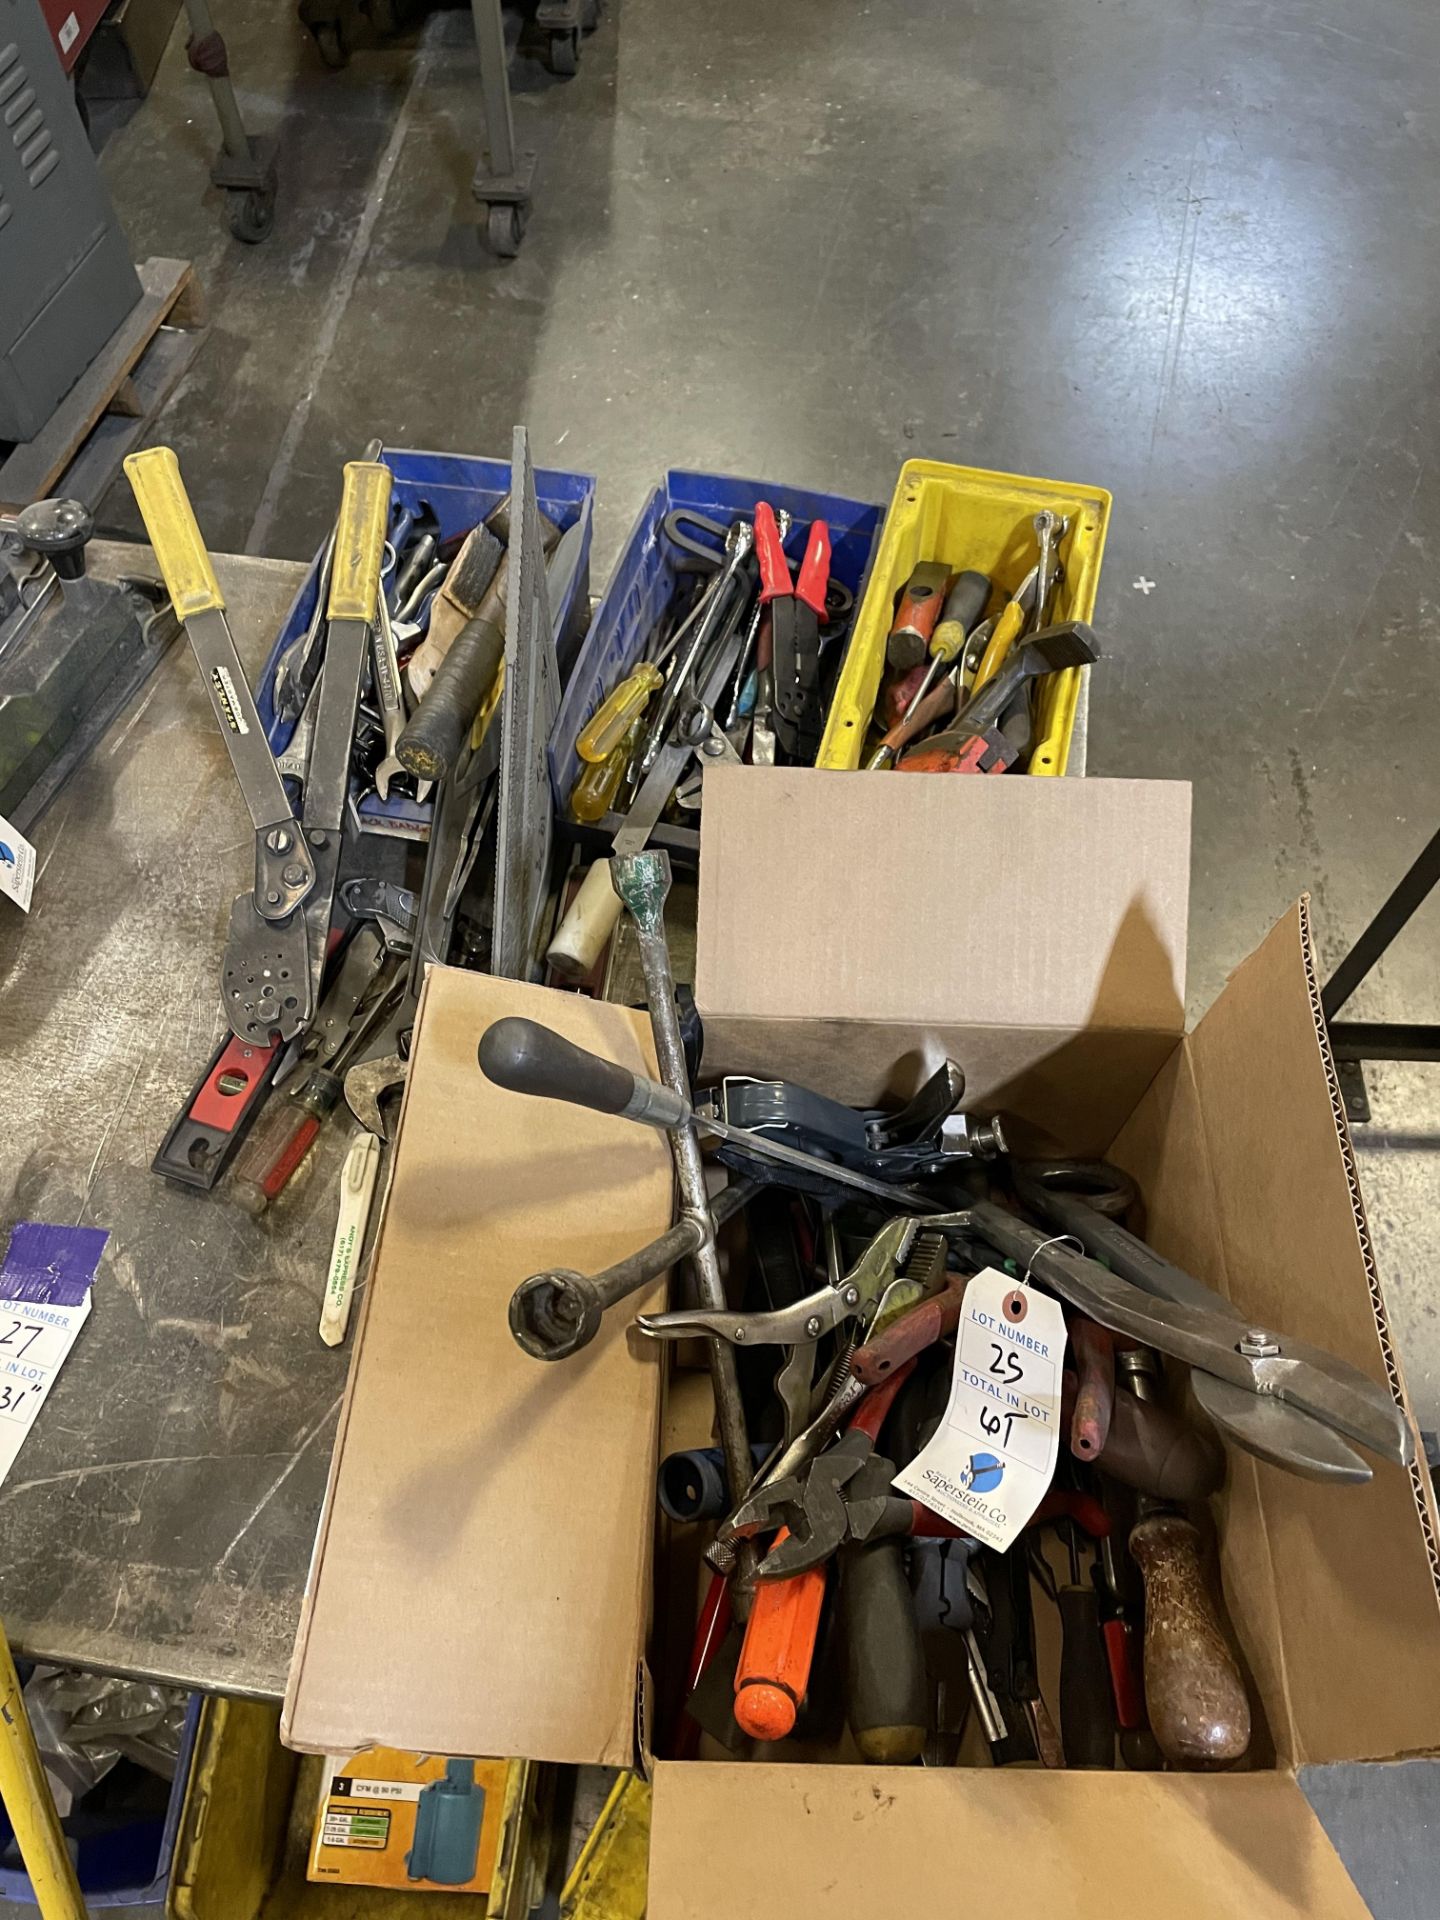 {LOT} Asst. Hand Tools c/o: Plyers, Wrenches, Screwdrivers, Levels, Tape Measures, Etc.